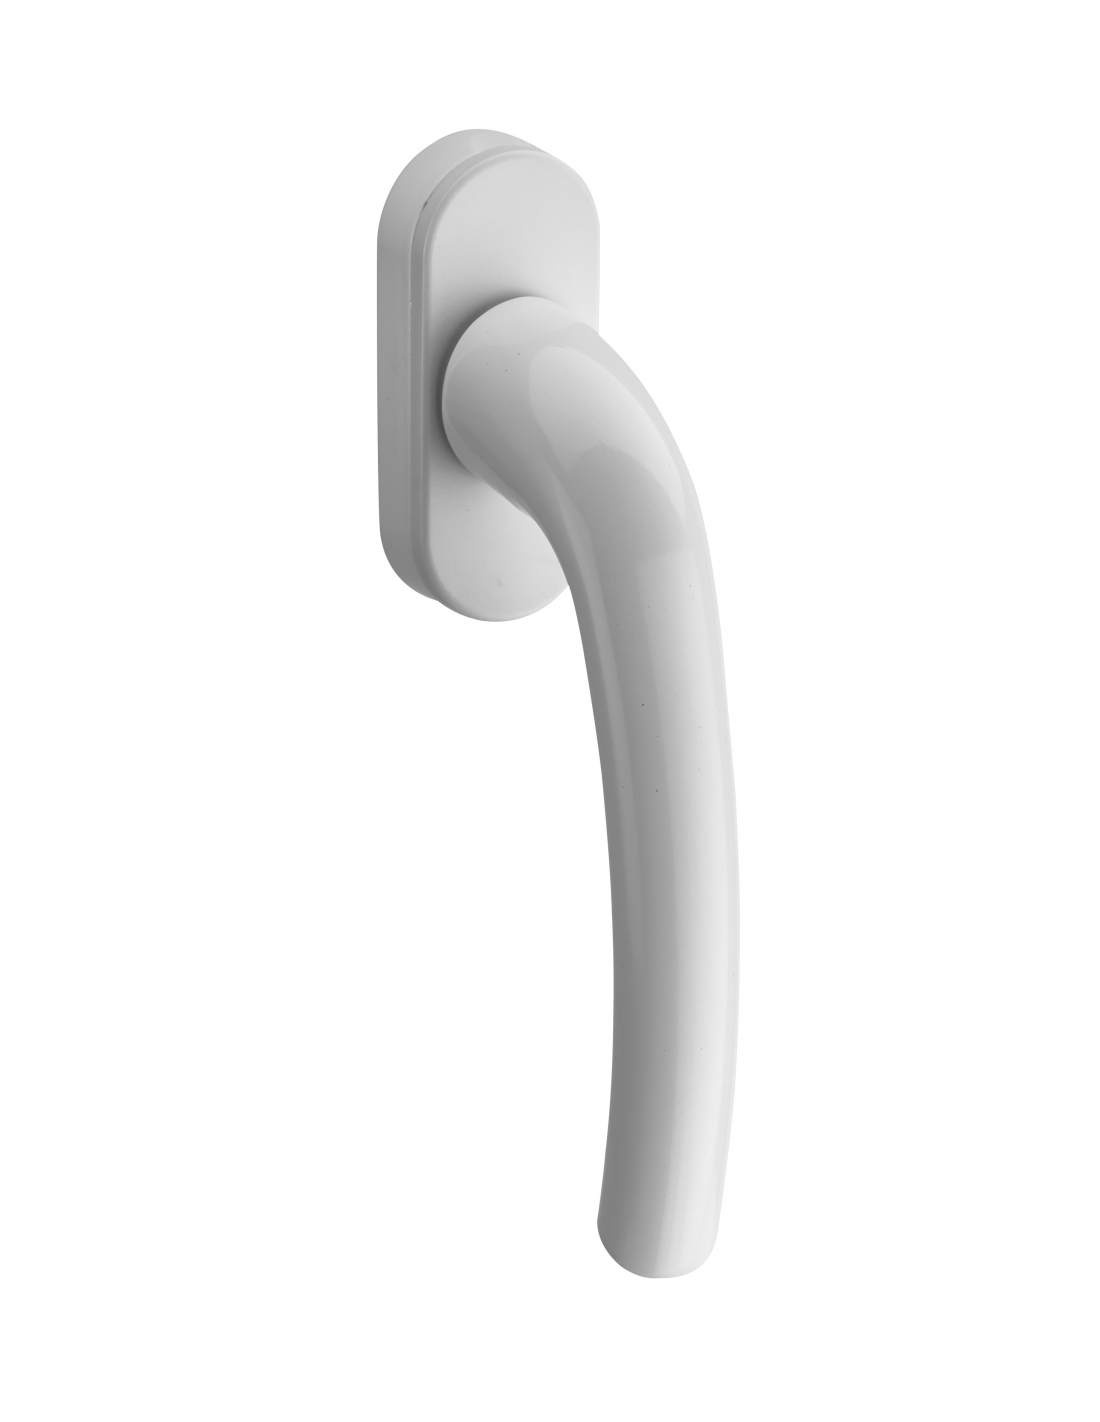 Window handle, 90° espagnolette lever handle with concealed screw, white